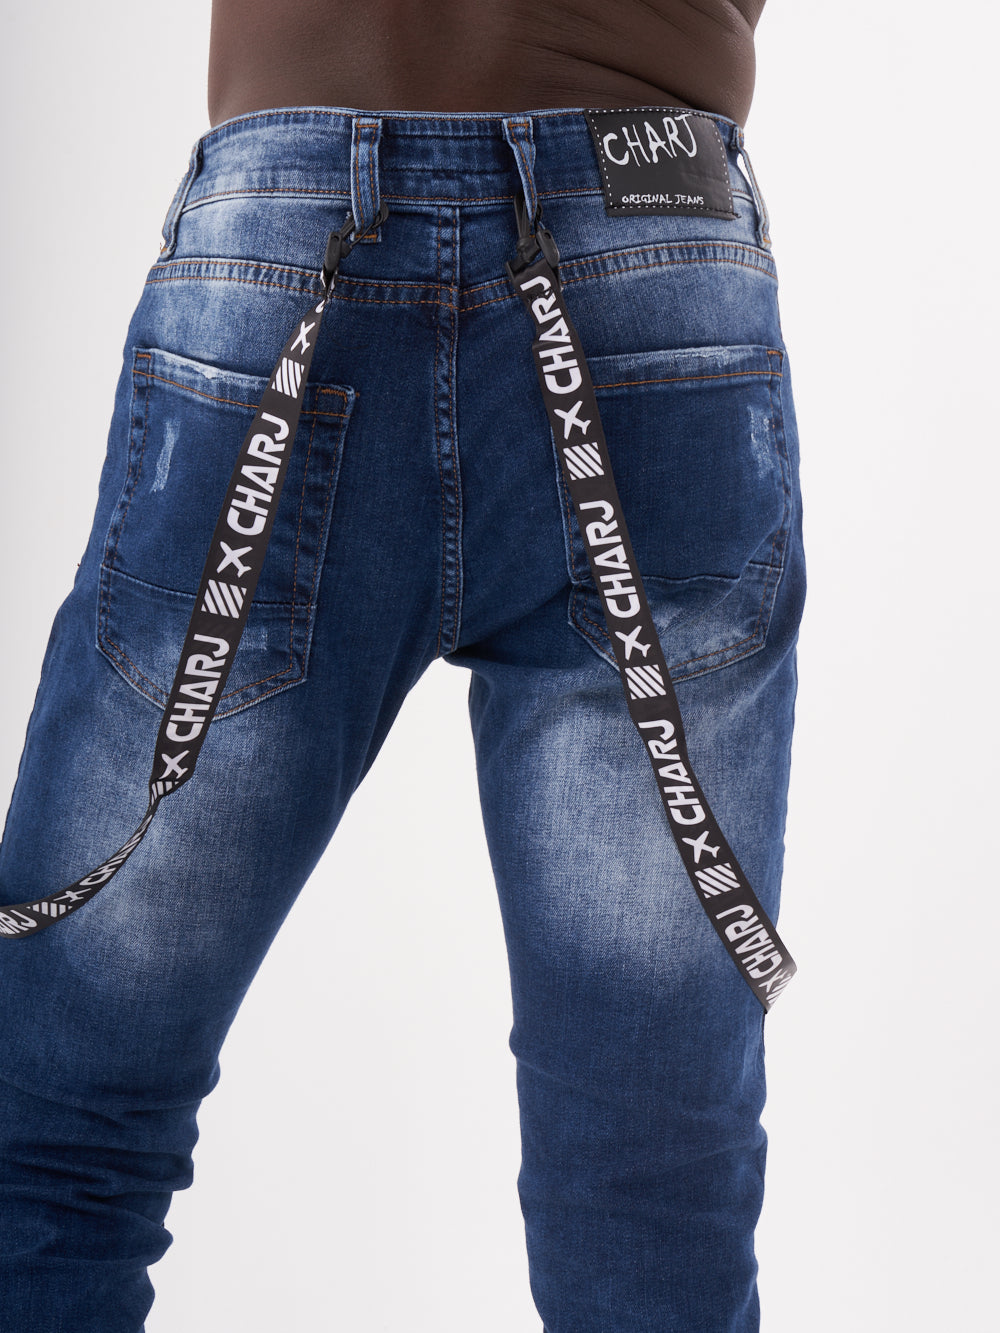 The back of a man wearing TORNADO BLUE jeans with a belt.